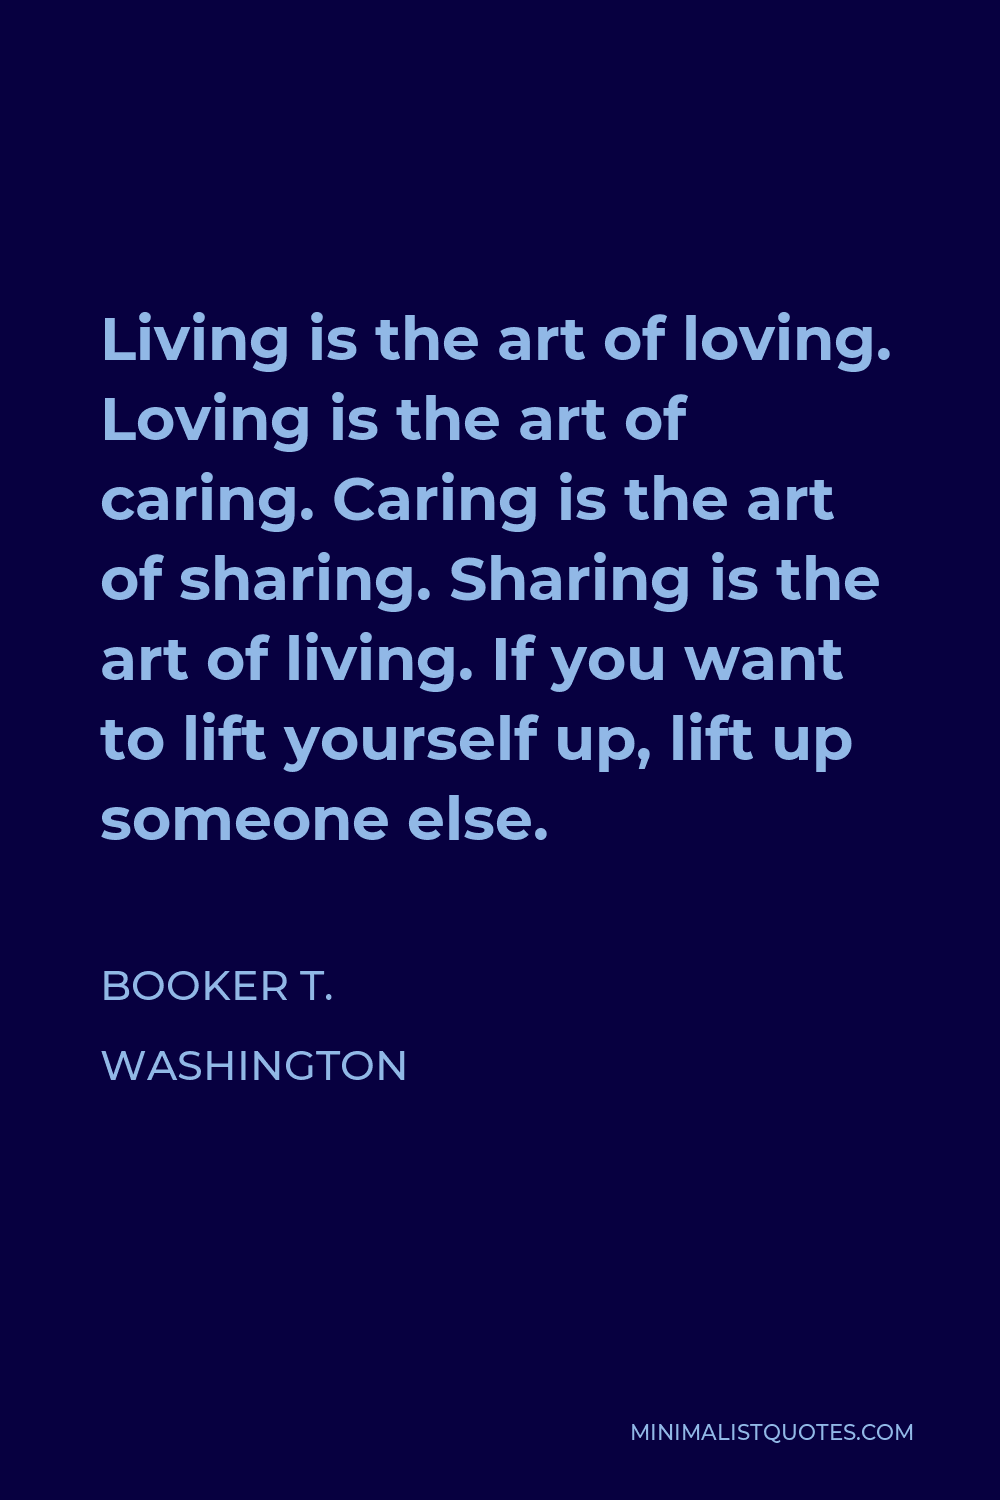 Booker T. Washington Quote - Living is the art of loving. Loving is the art of caring. Caring is the art of sharing. Sharing is the art of living. If you want to lift yourself up, lift up someone else.